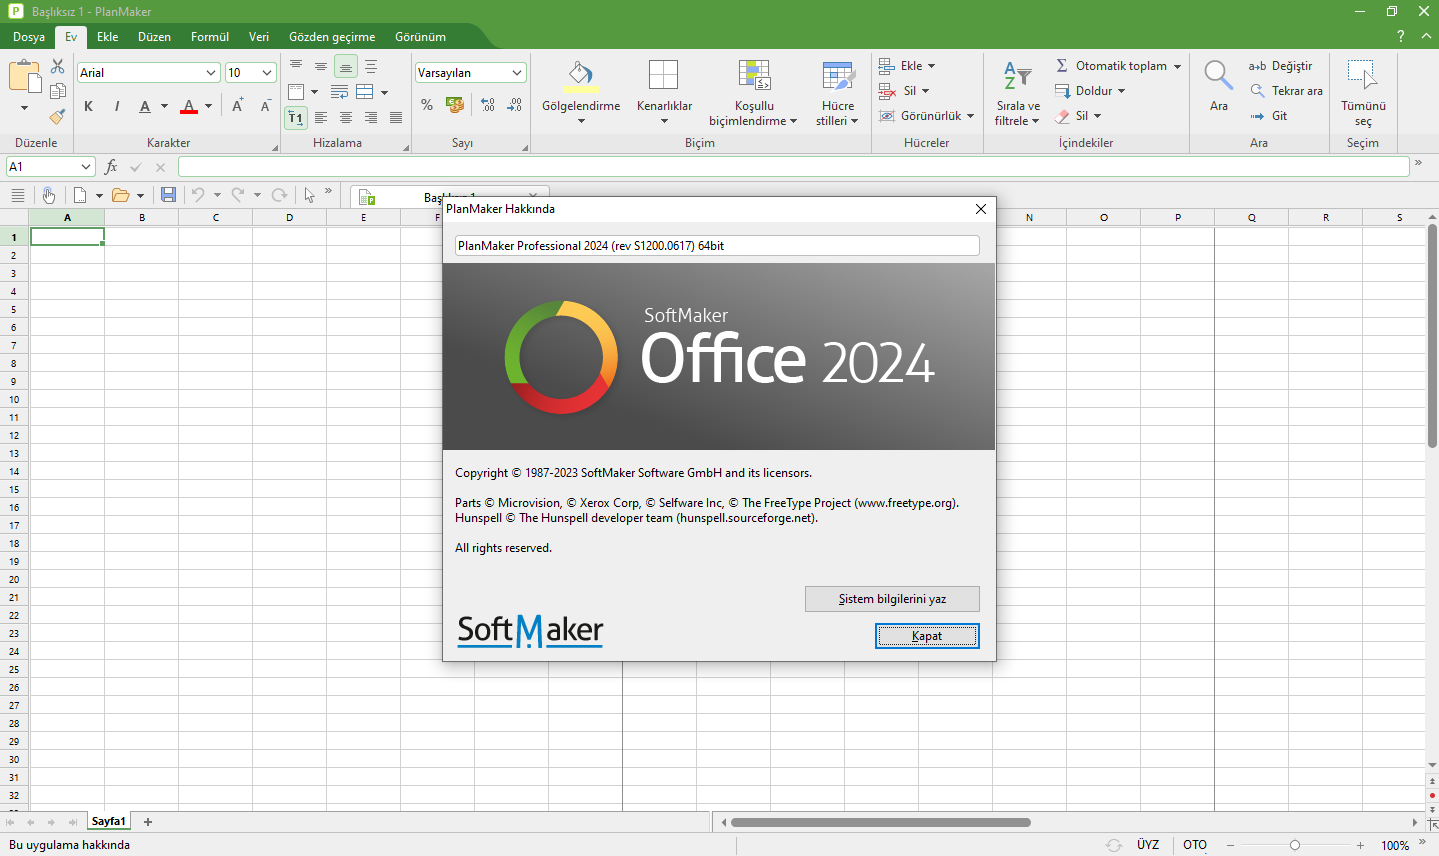 SoftMaker Office Professional 2024 rev.1204.0902 for mac download free